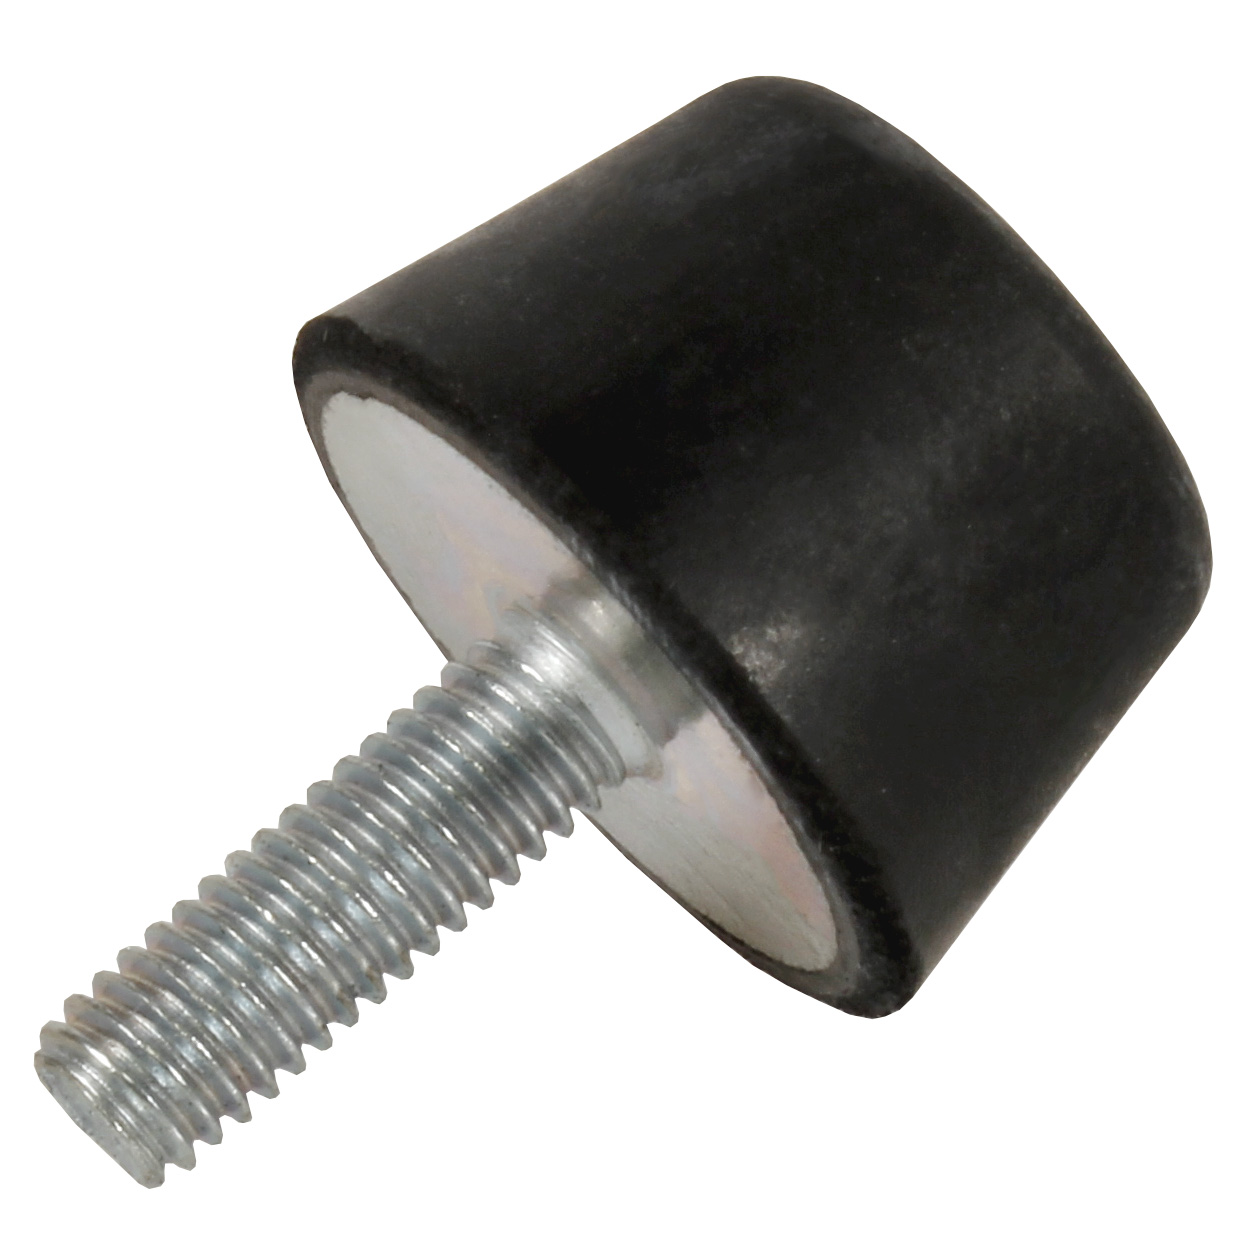 Stainless steel progressive stop - stainless steel - Conical - 1 side Male